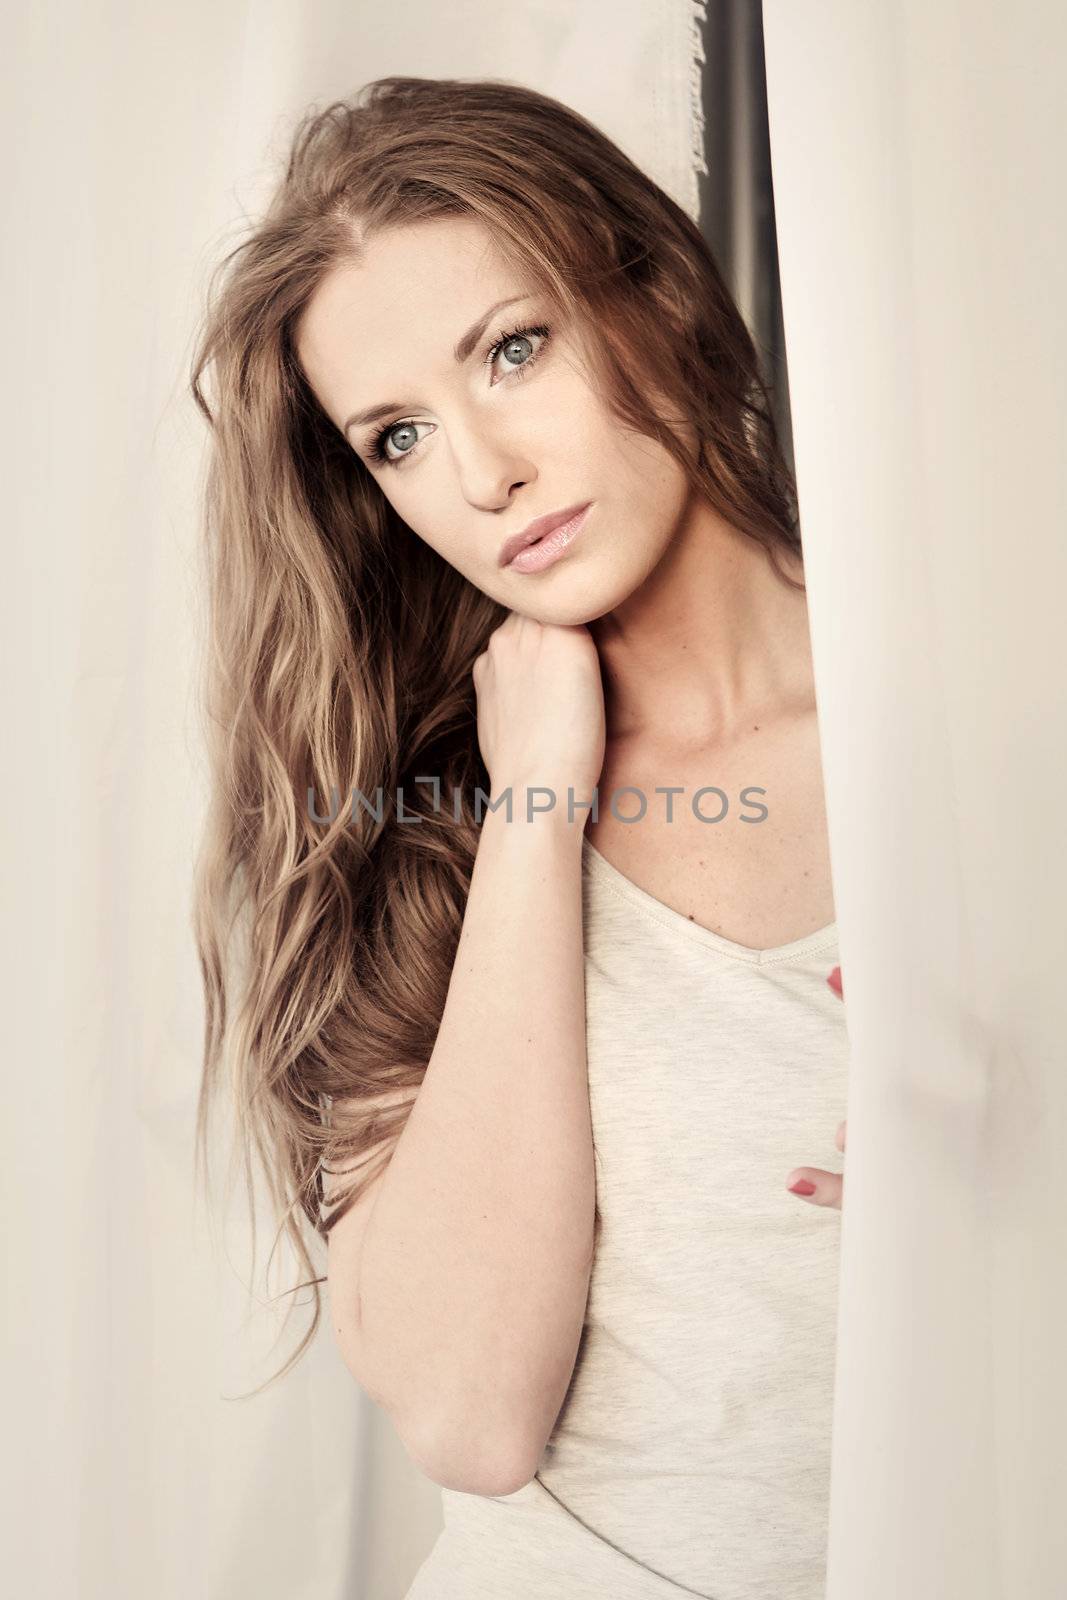 Beautiful girl looking through the curtains by robert_przybysz